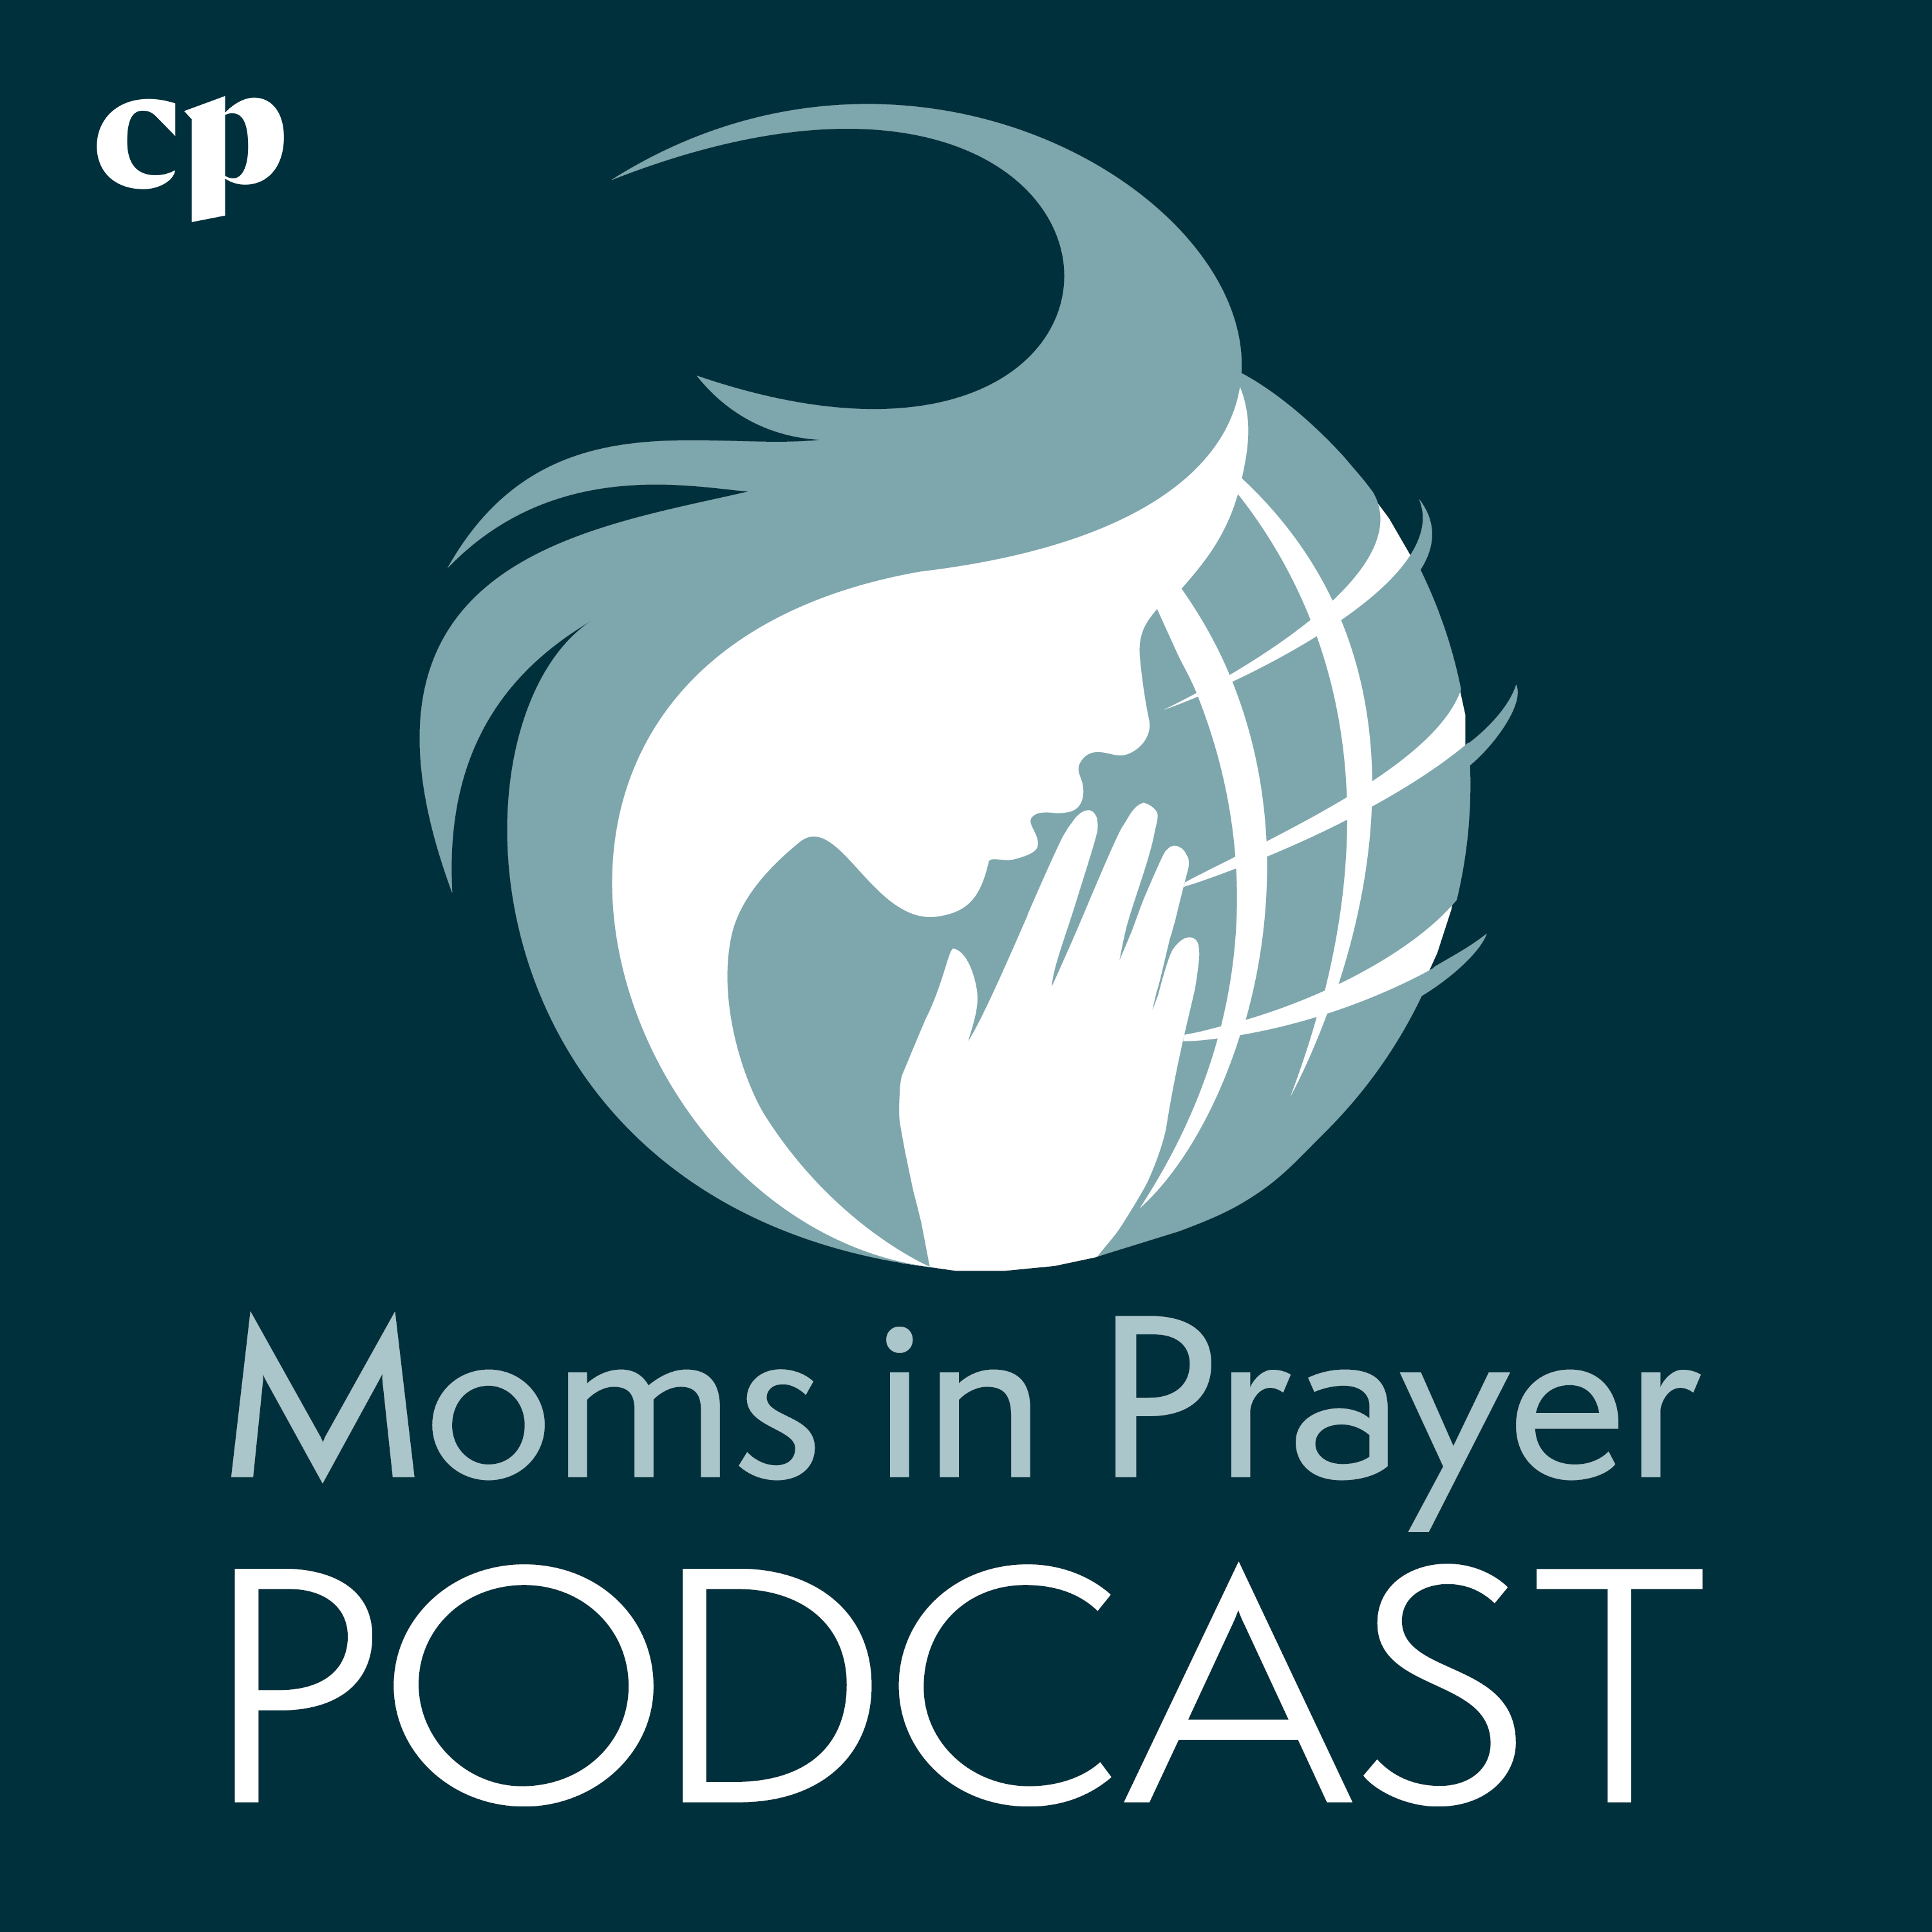 Episode 166 - My Prayers Make a Difference with Fern Nichols